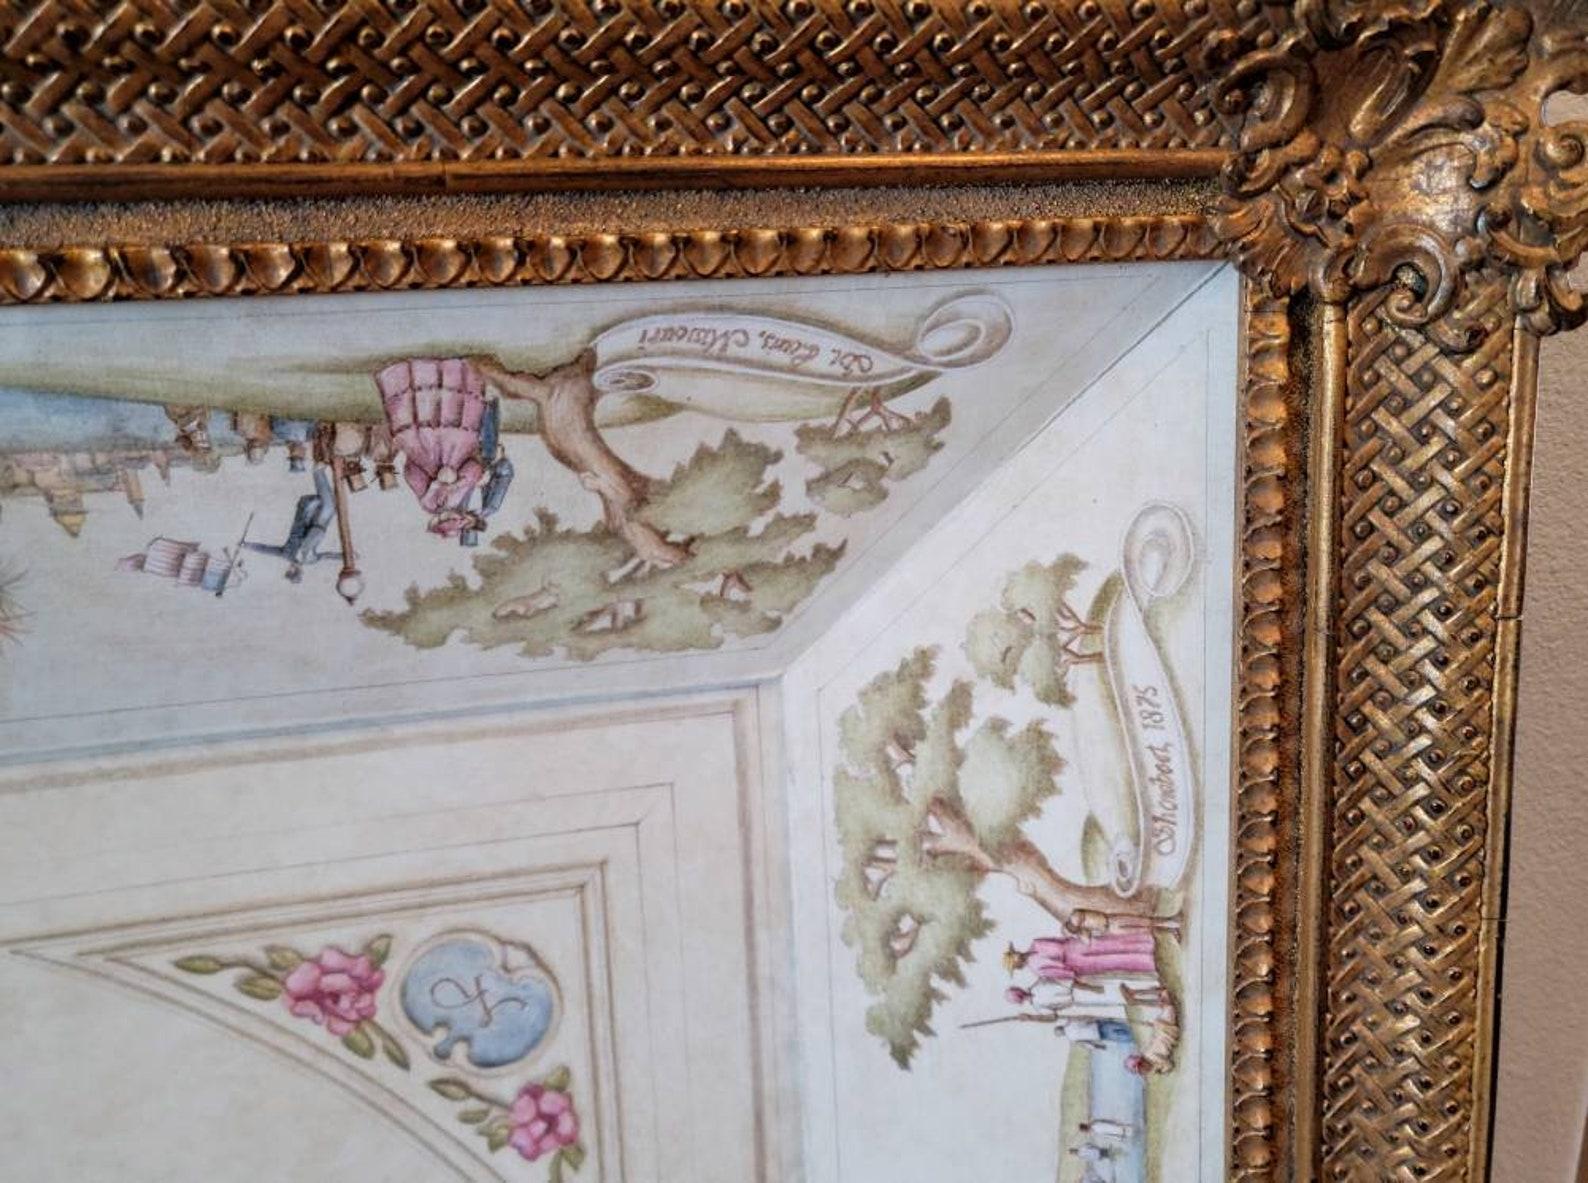 Large Antique Architectural Trompe L'oeil Framed Ceiling Mural In Good Condition For Sale In Forney, TX